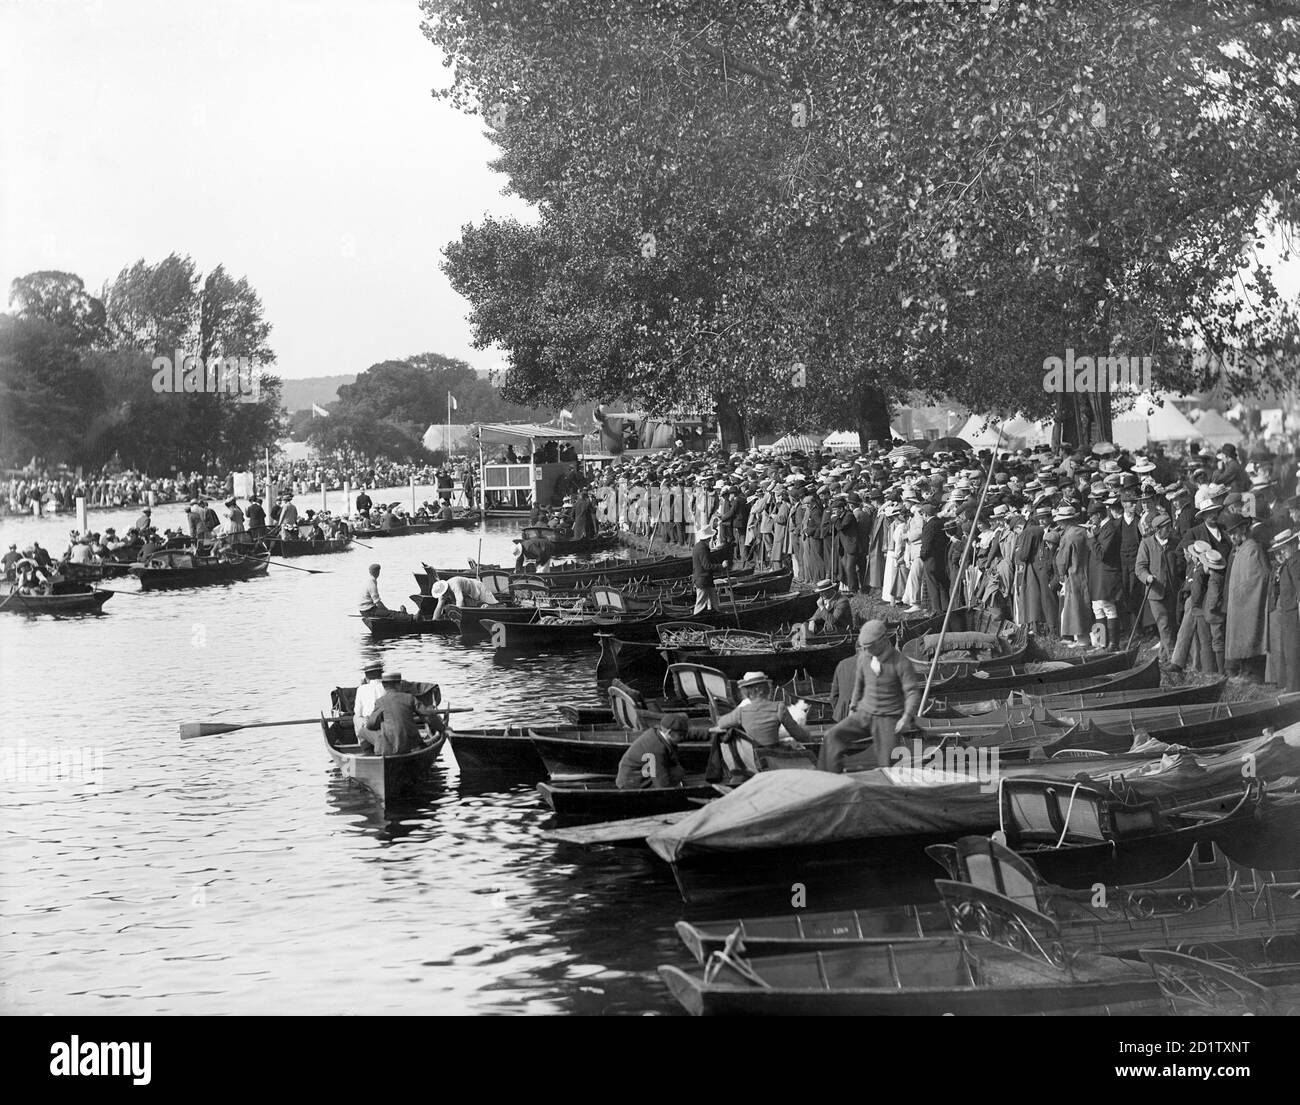 HENLEY-ON-THAMES, Oxfordshire. Crowds of onlookers on the bank of the river and boats moored close by during the Regatta, an important social and competitive event held each year on the Thames since 1839. Photographed by Hentry Taunt in 1902. Stock Photo